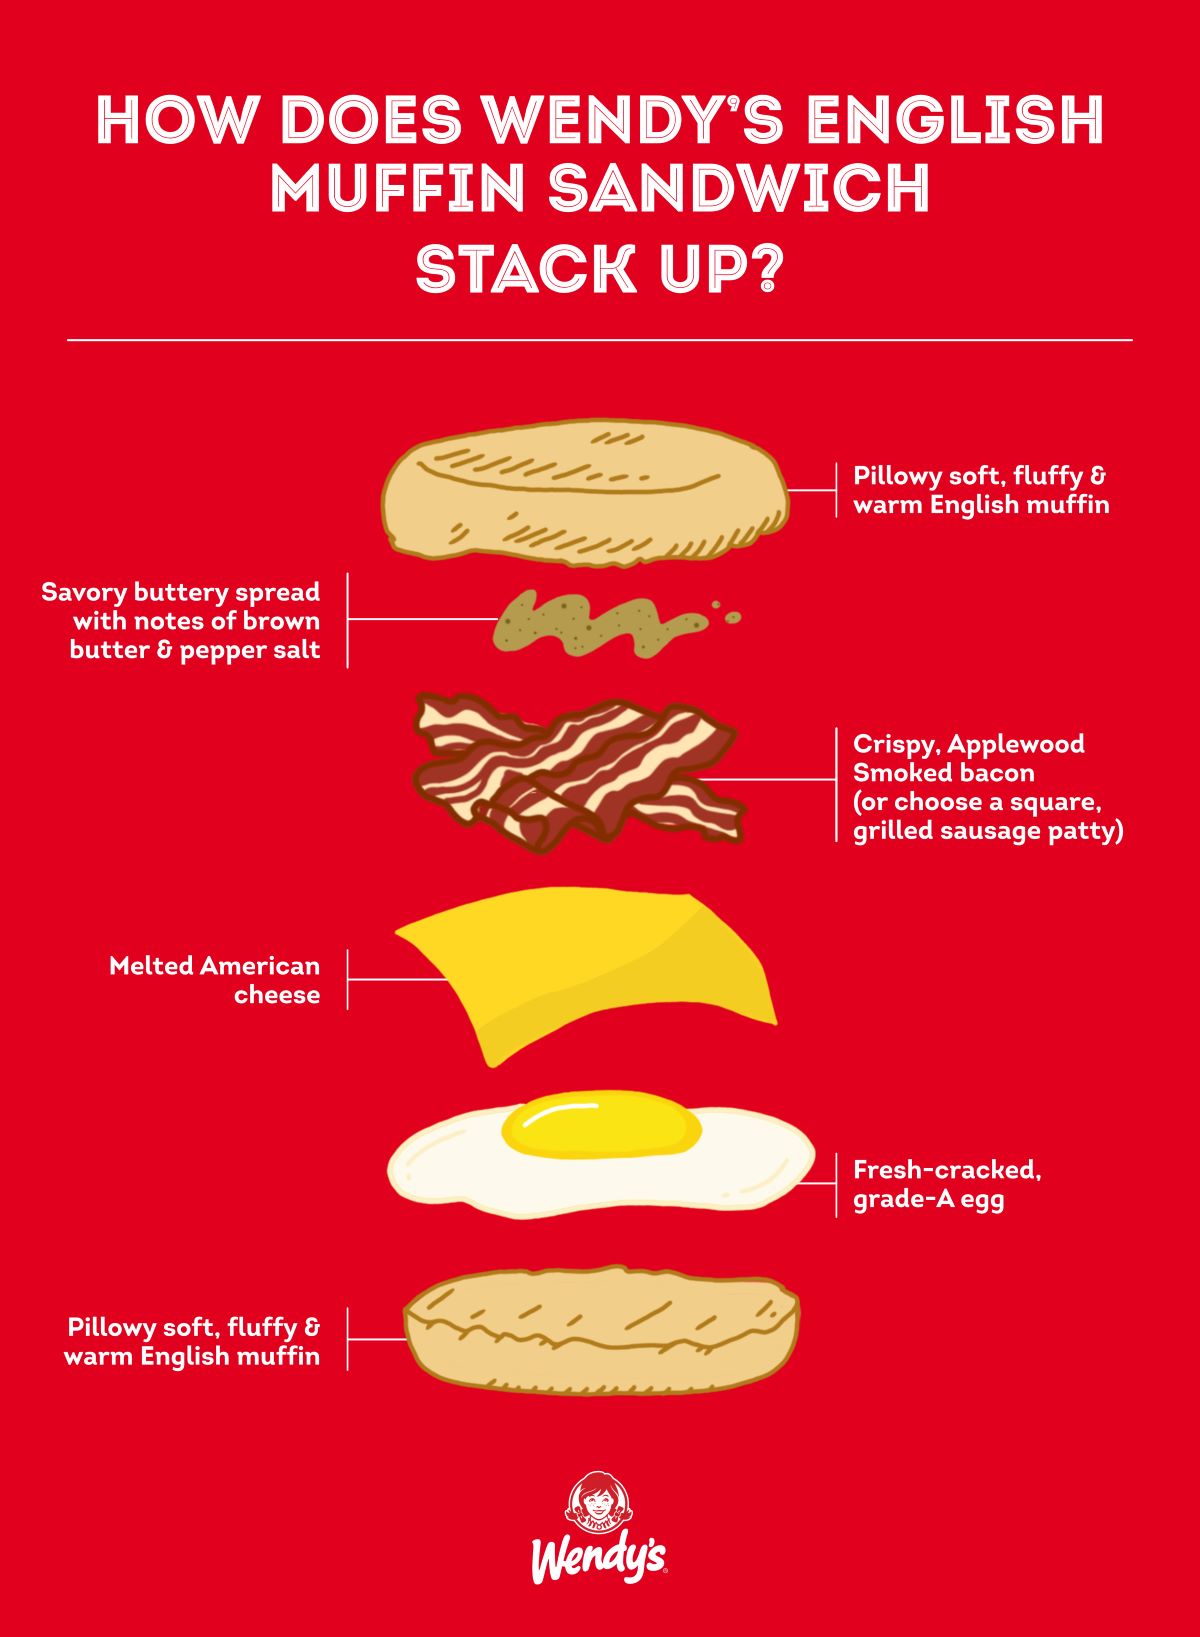 Graphic of Wendy's newest English Muffin titled "How Does Wendy's English Muffin Sandwich Stack Up?" with each ingredient listed including a savory buttery spread, bacon, American cheese, fresh-cracked egg and English Muffin. 